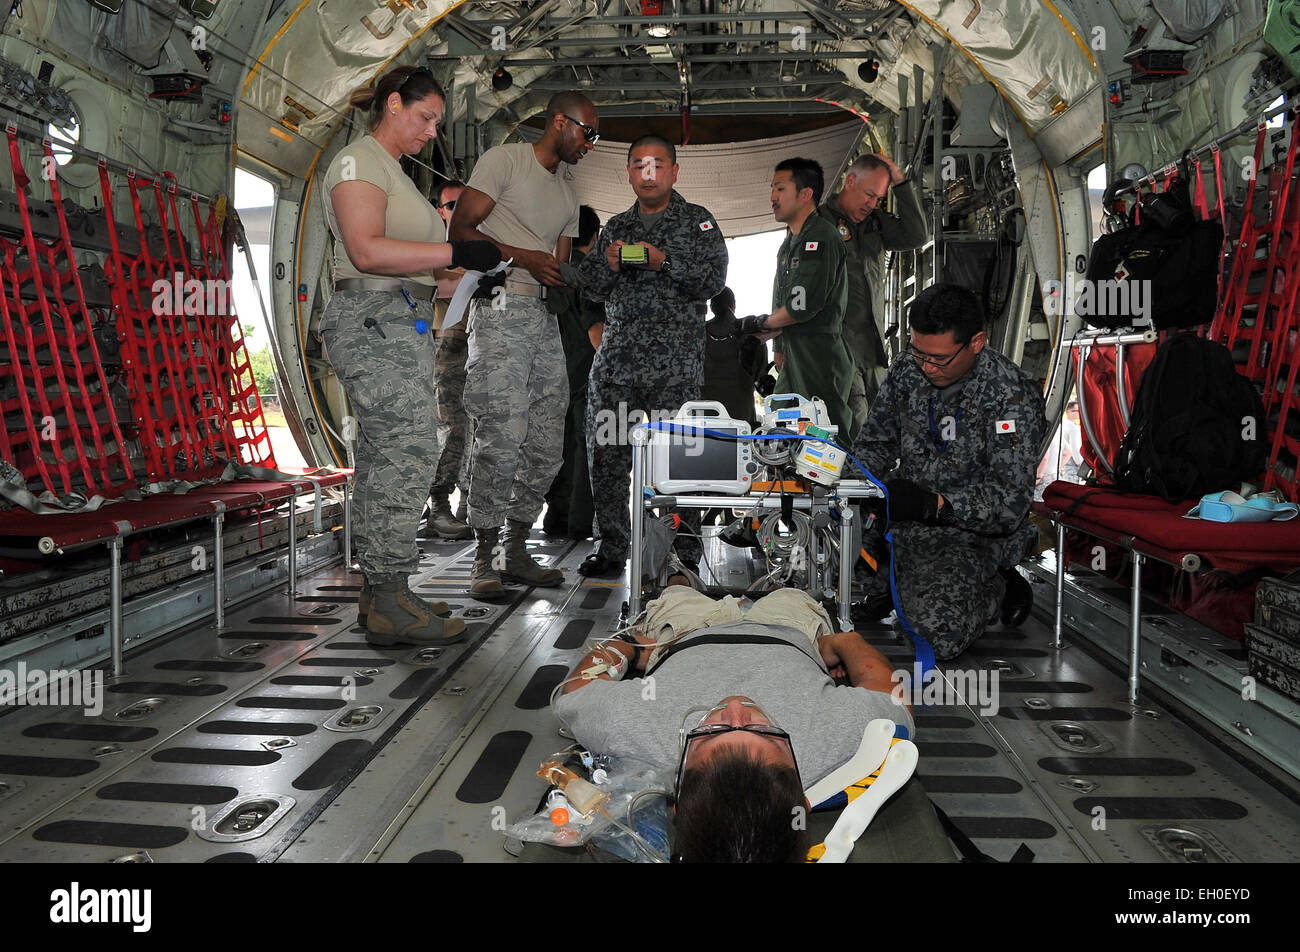 U.S. Air Force Airmen transfer a simulated critical care patient to a Japan Air Self-Defense Force aeromedical evacuation team at Sinapalo, Rota, Feb. 16, 2015. Exercise Cope North 15 enhances humanitarian assistance and disaster relief crisis response capabilities between six nations, and lays the foundation for regional cooperation expansion during real-world contingencies in the Asia-Pacific region. Stock Photo